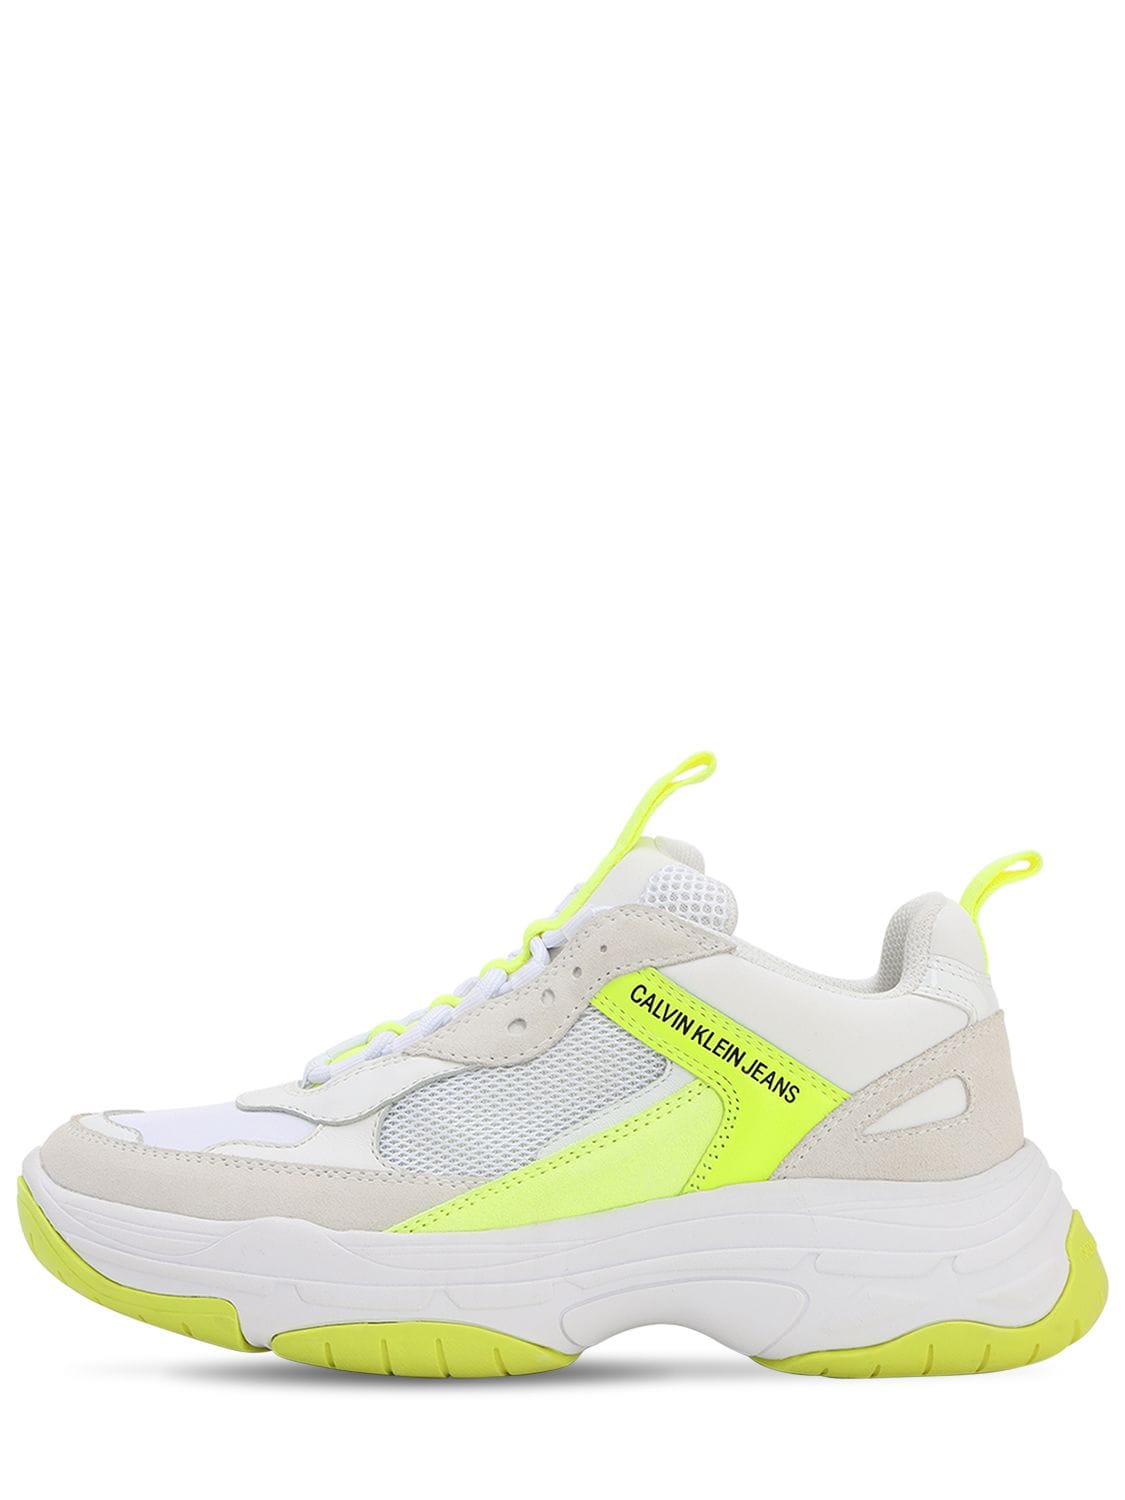 Calvin Klein Jeans Est.1978 40mm Maya Mesh & Suede Sneakers In White,yellow